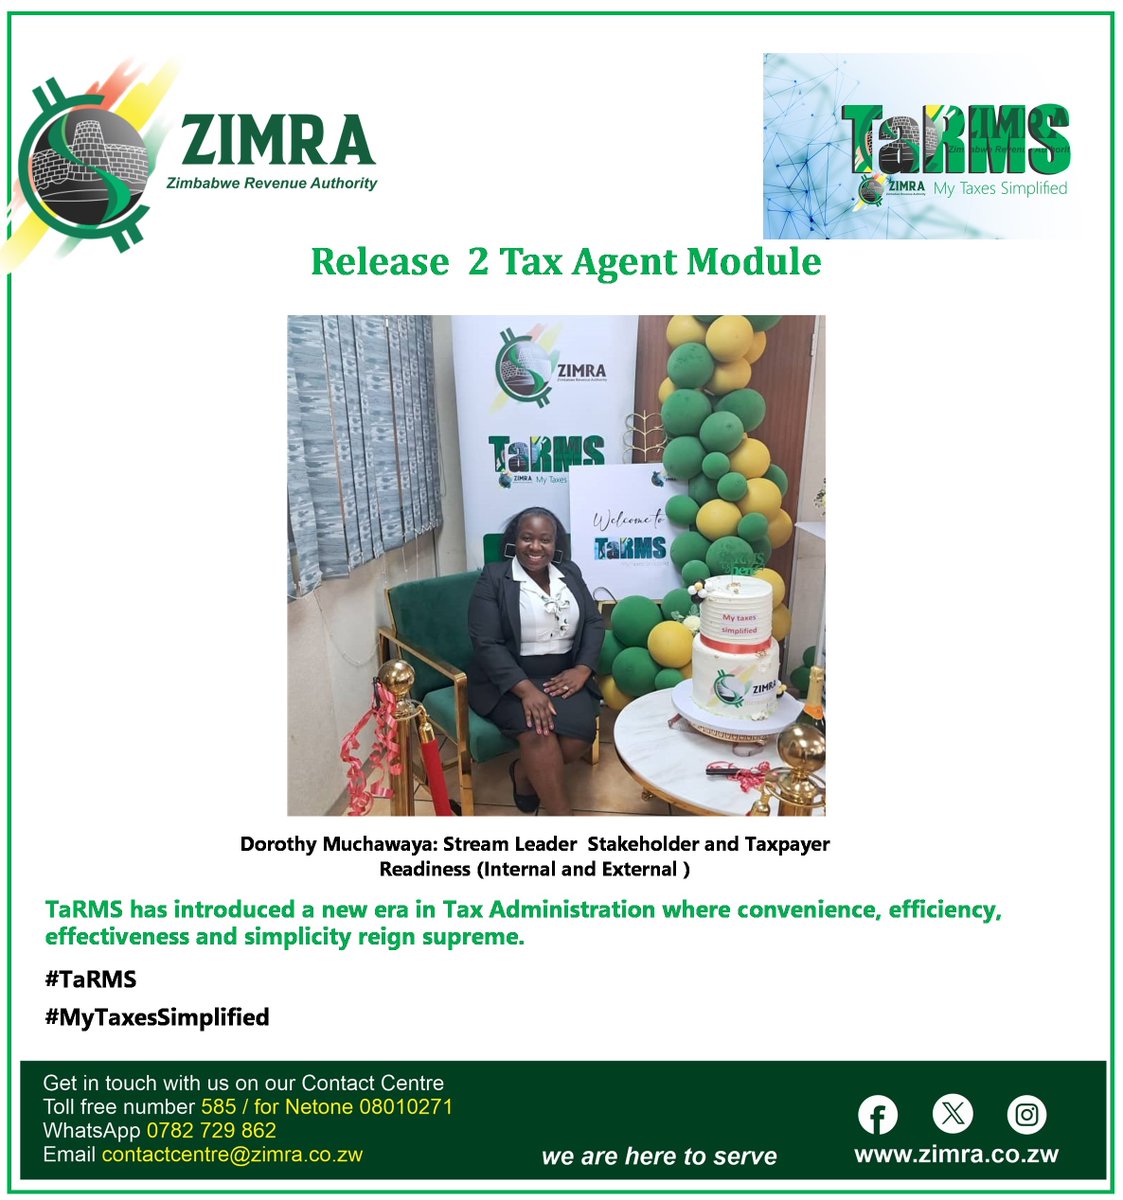 TaRMS Release 2 Tax Agent Module #TaRMS